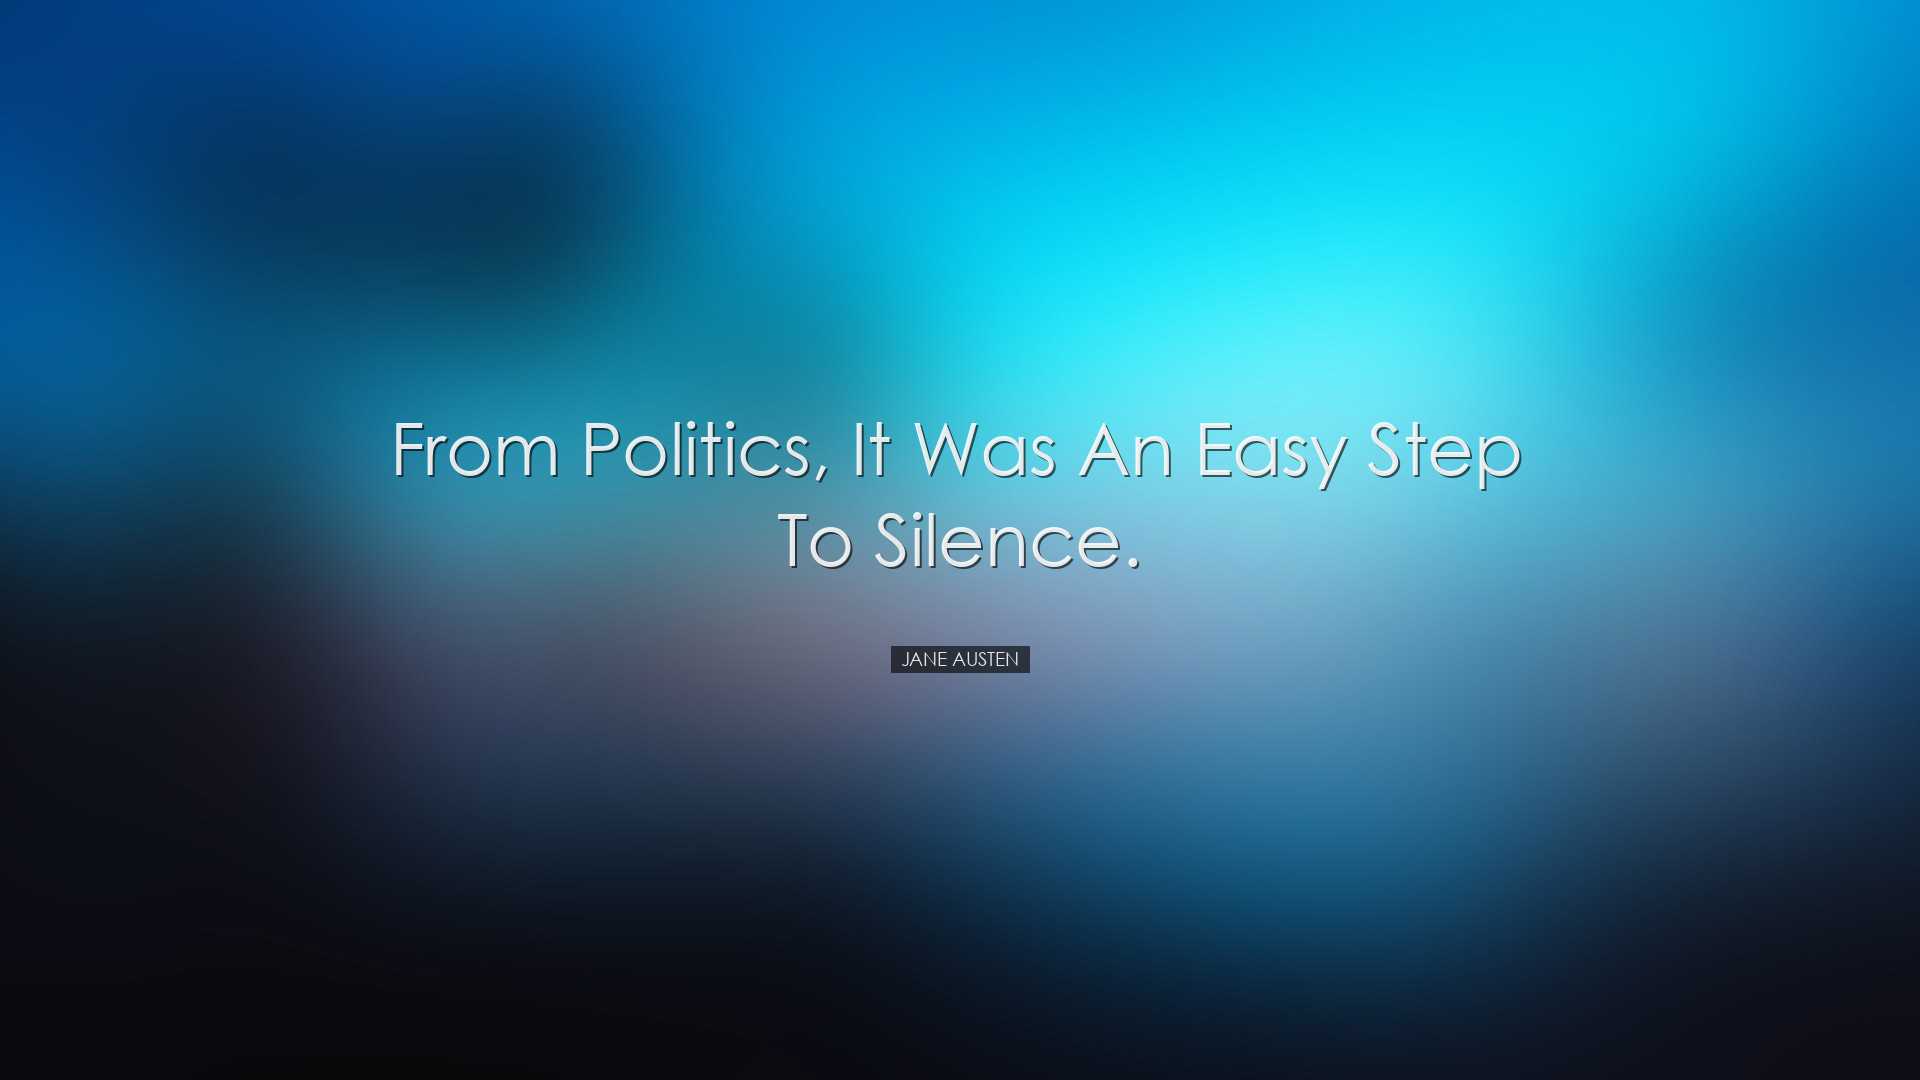 From politics, it was an easy step to silence. - Jane Austen